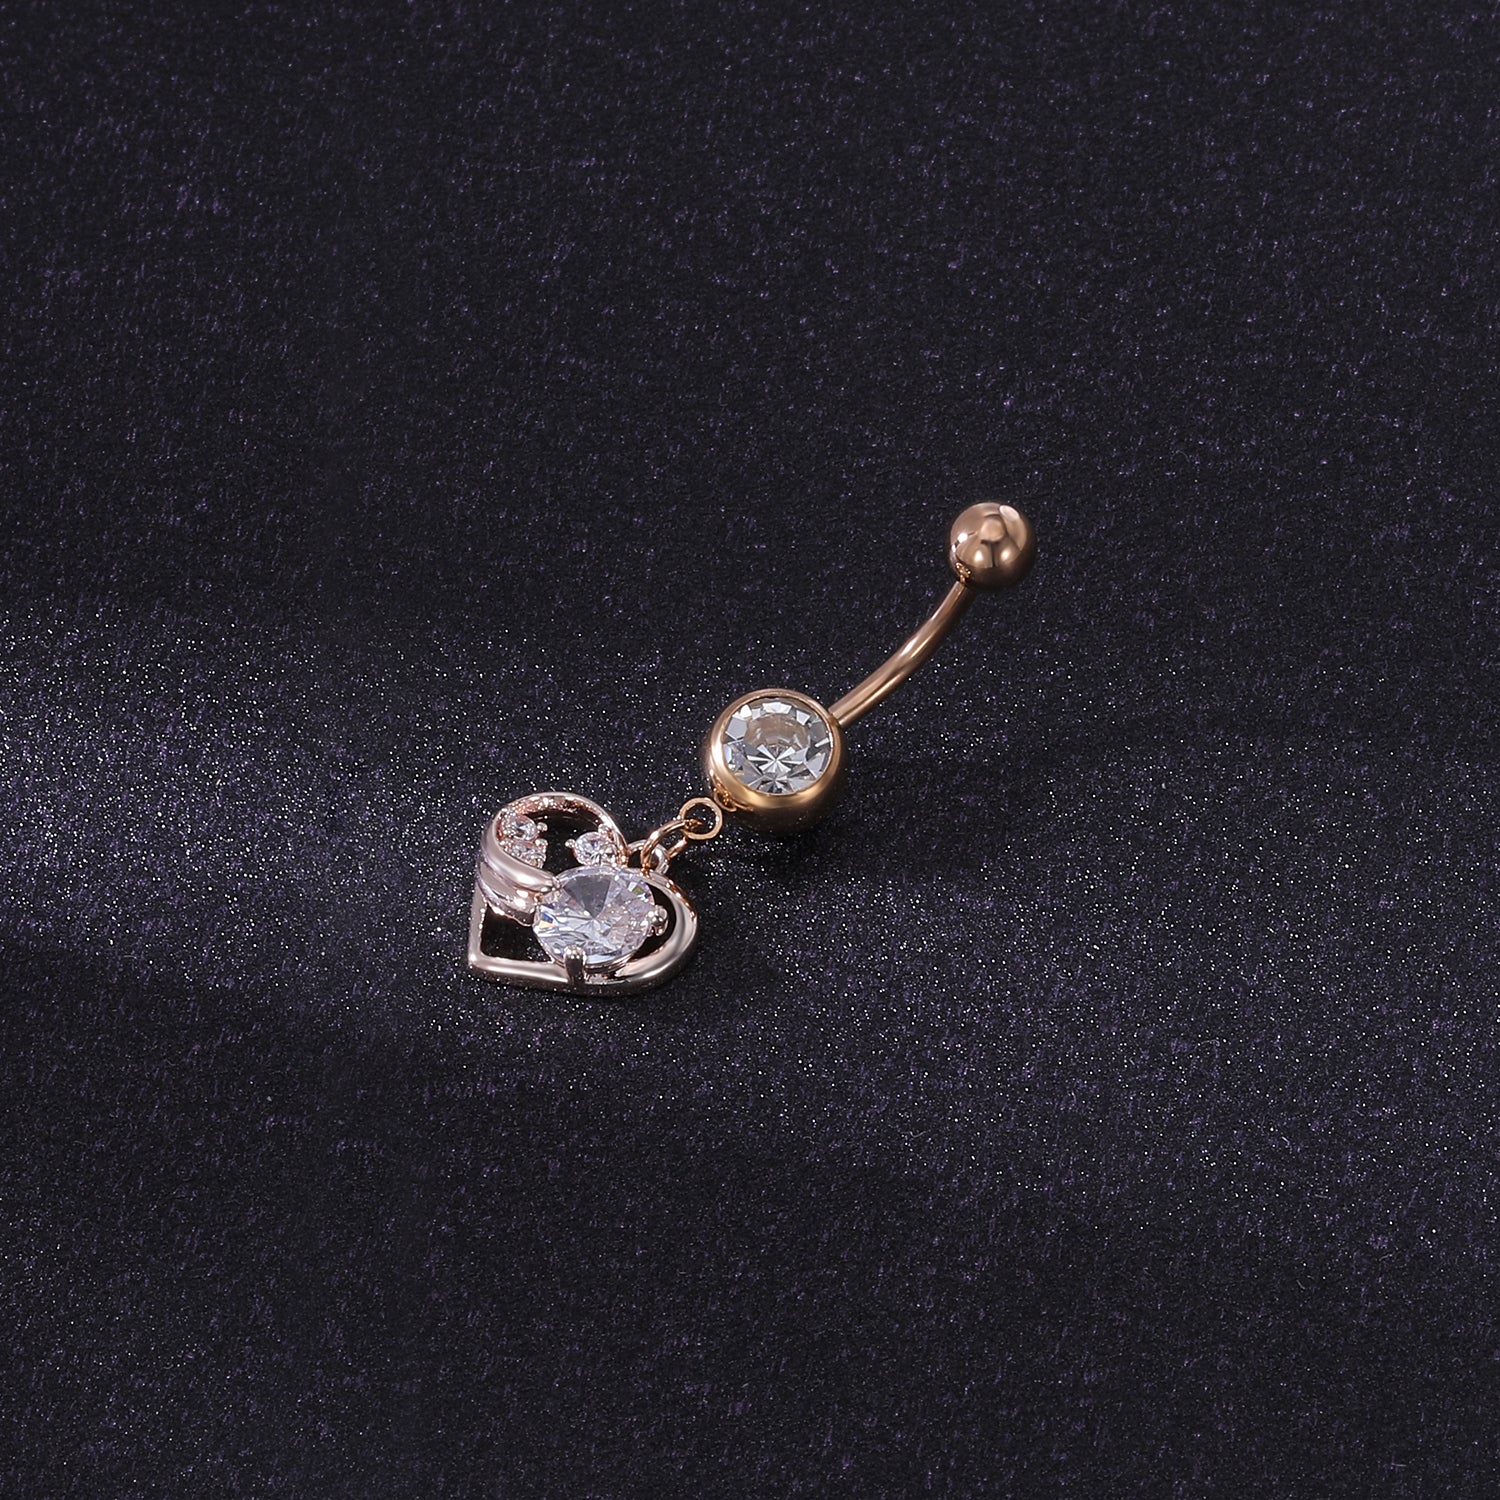 14g-Dangle-Heart-Rose-Gold-Navel-Rings-Double-Crystal-Navel-Ring-Piercing-Jewelry